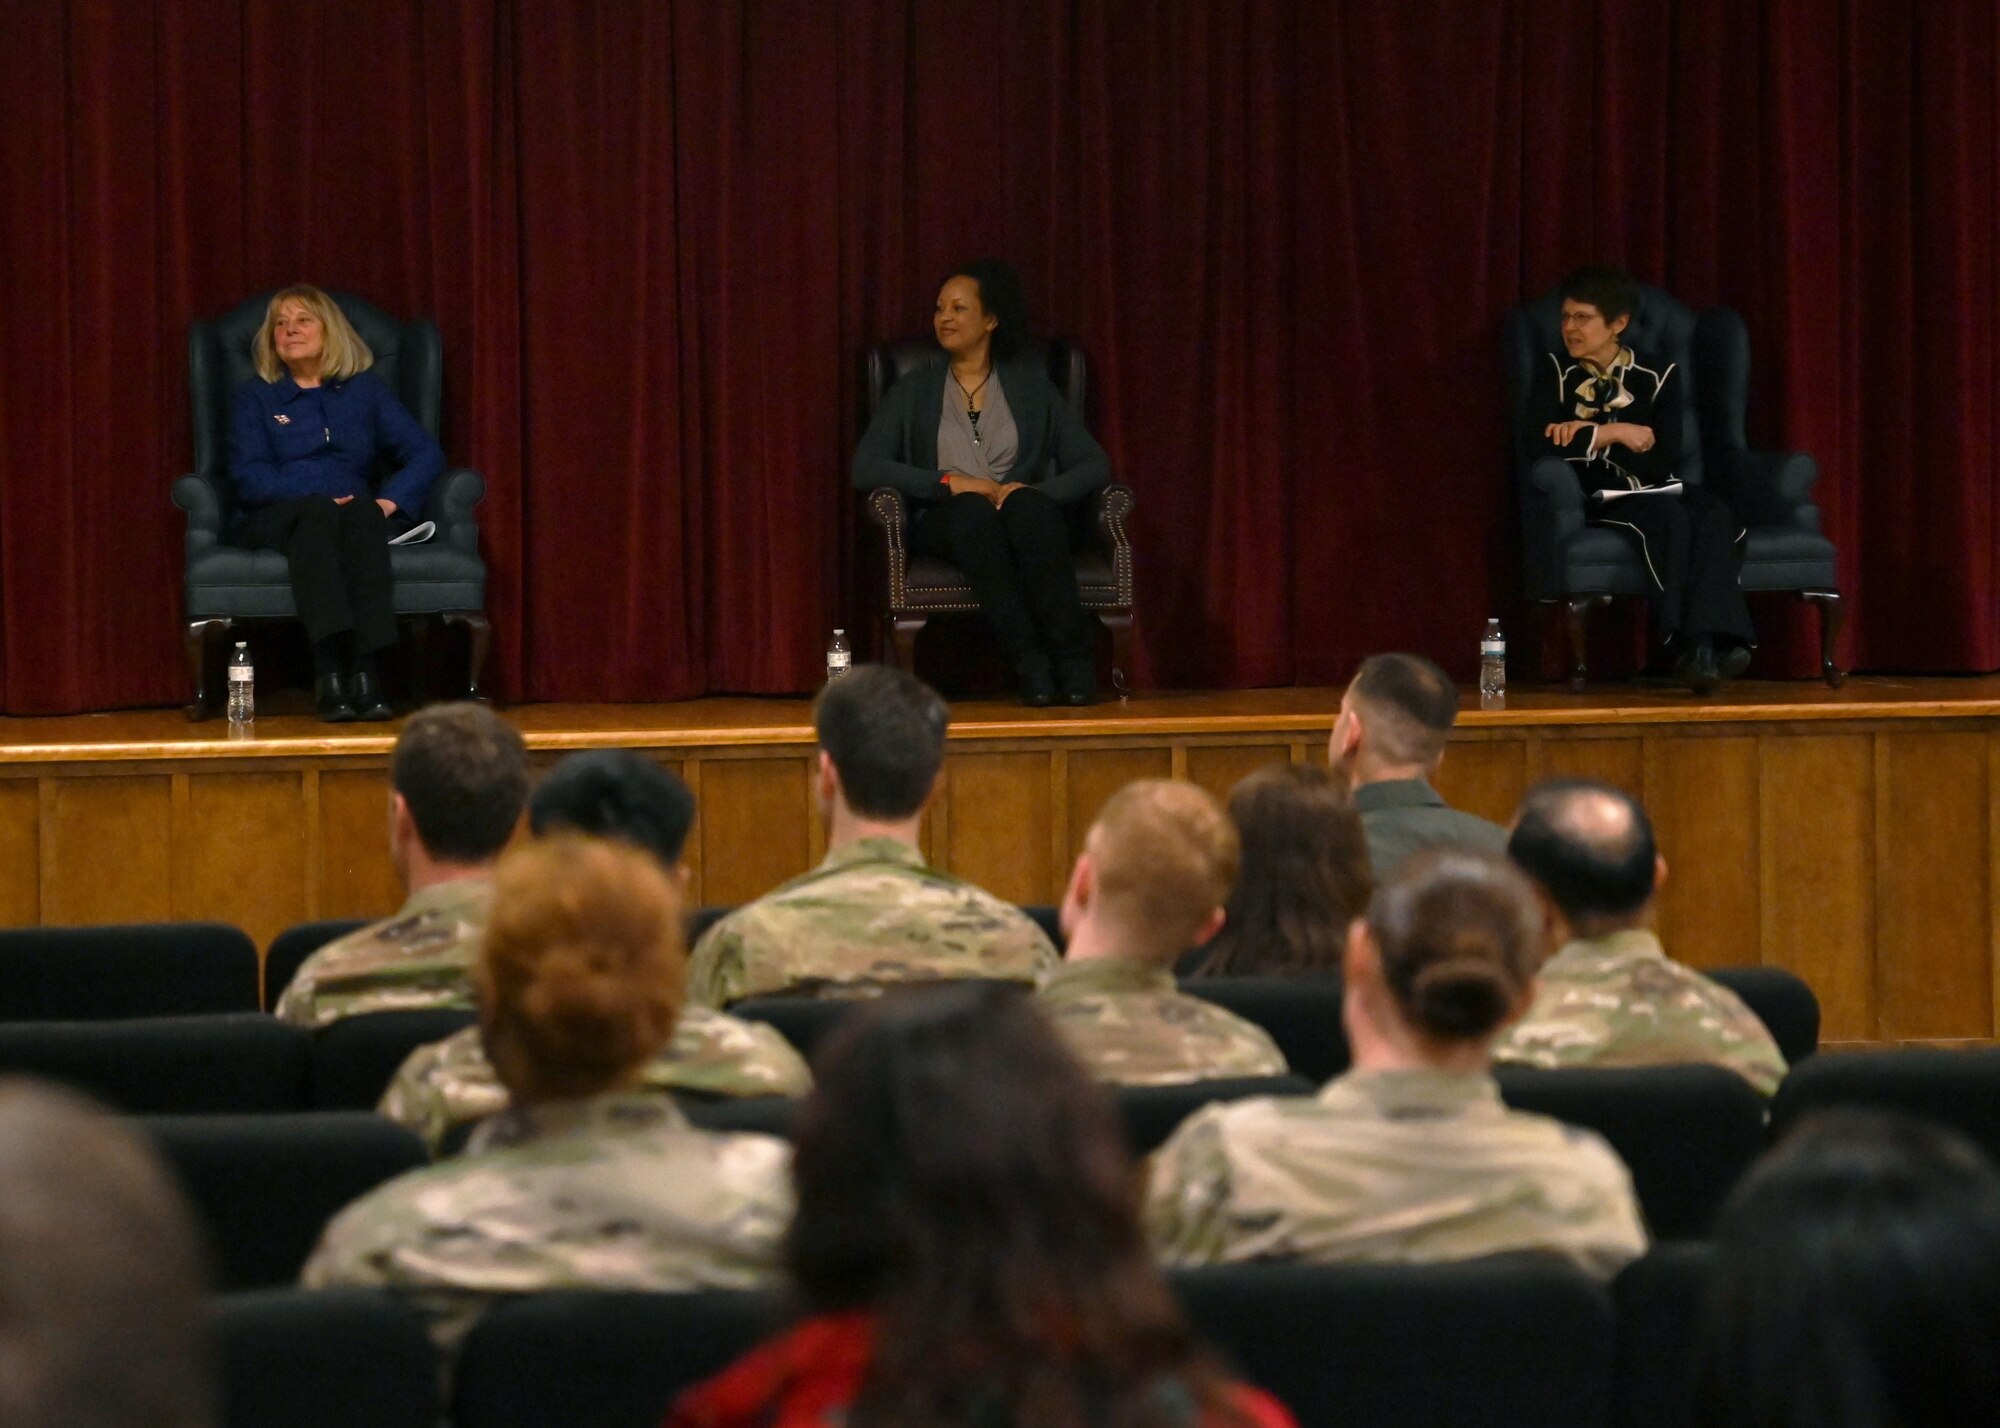 Retired U.S. Air Force Col. Peggy Phillips, left, Retired Lt. Col. Kimberly Ford, center, and Ms. Laina Reeves, sit on a Women in Aviation Panel at Joint Base Lewis-McChord, Washington, March 28, 2022. The panel shared their personal experiences as women in a male-dominated career field in celebration of Women’s History Month. (U.S. Air Force photo by Airman 1st Class Callie Norton)